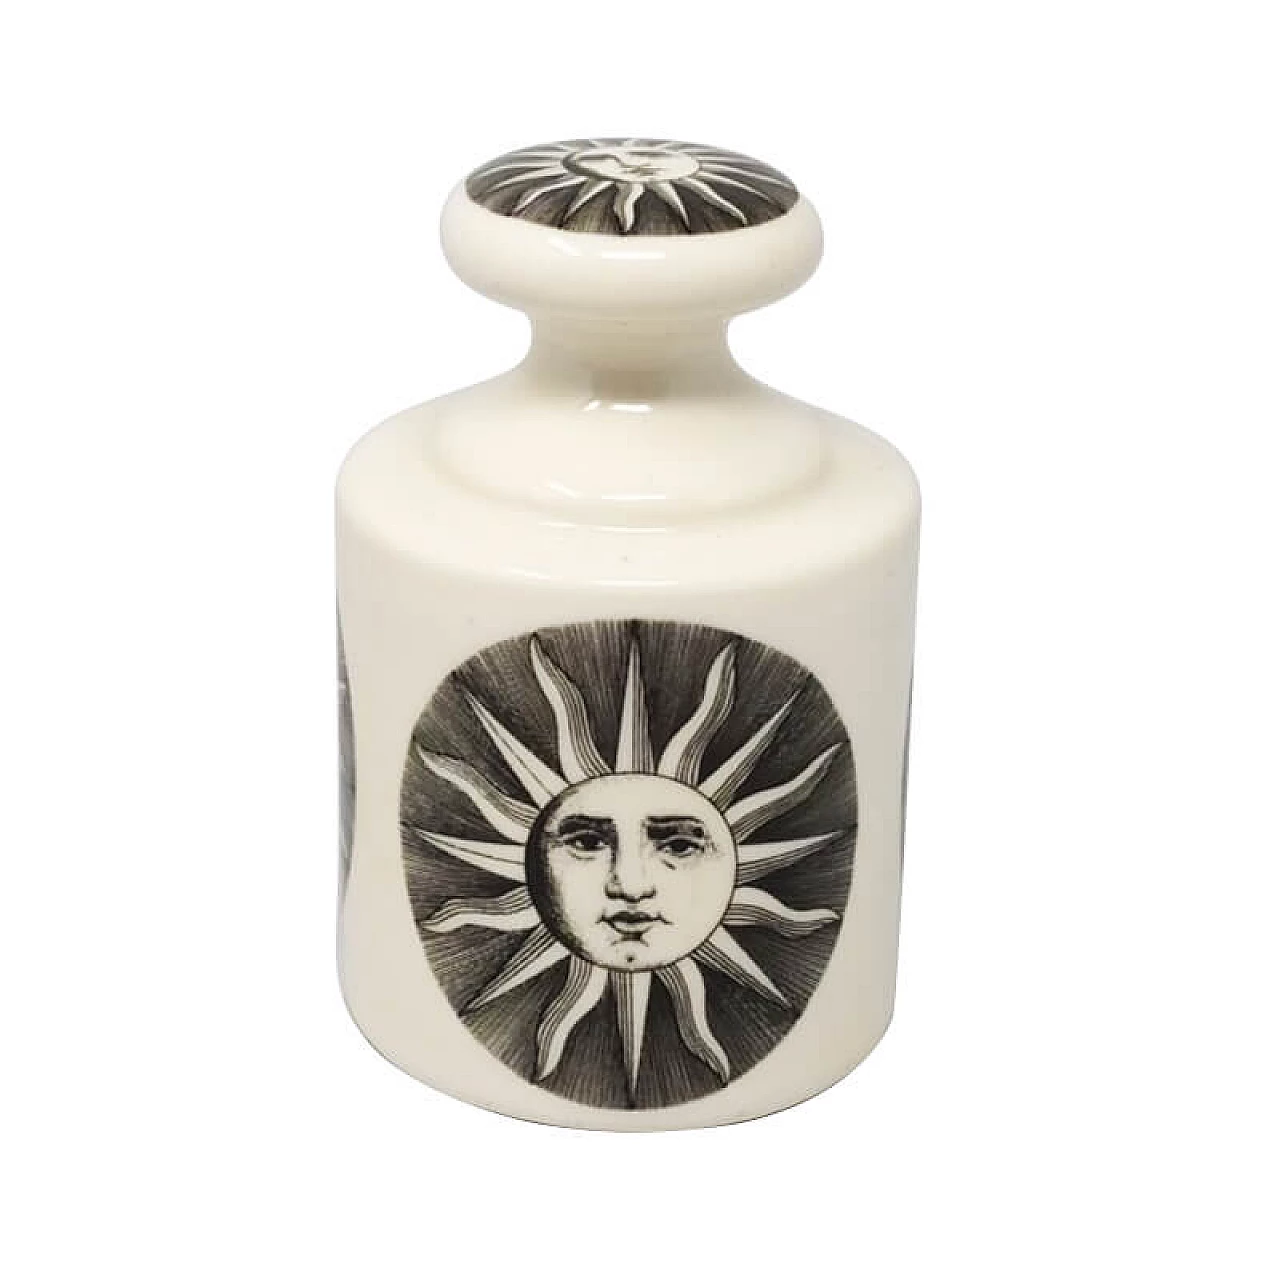 Fornasetti ceramic paperweight made in Italy by Piero Fornasetti, 50s 1157452